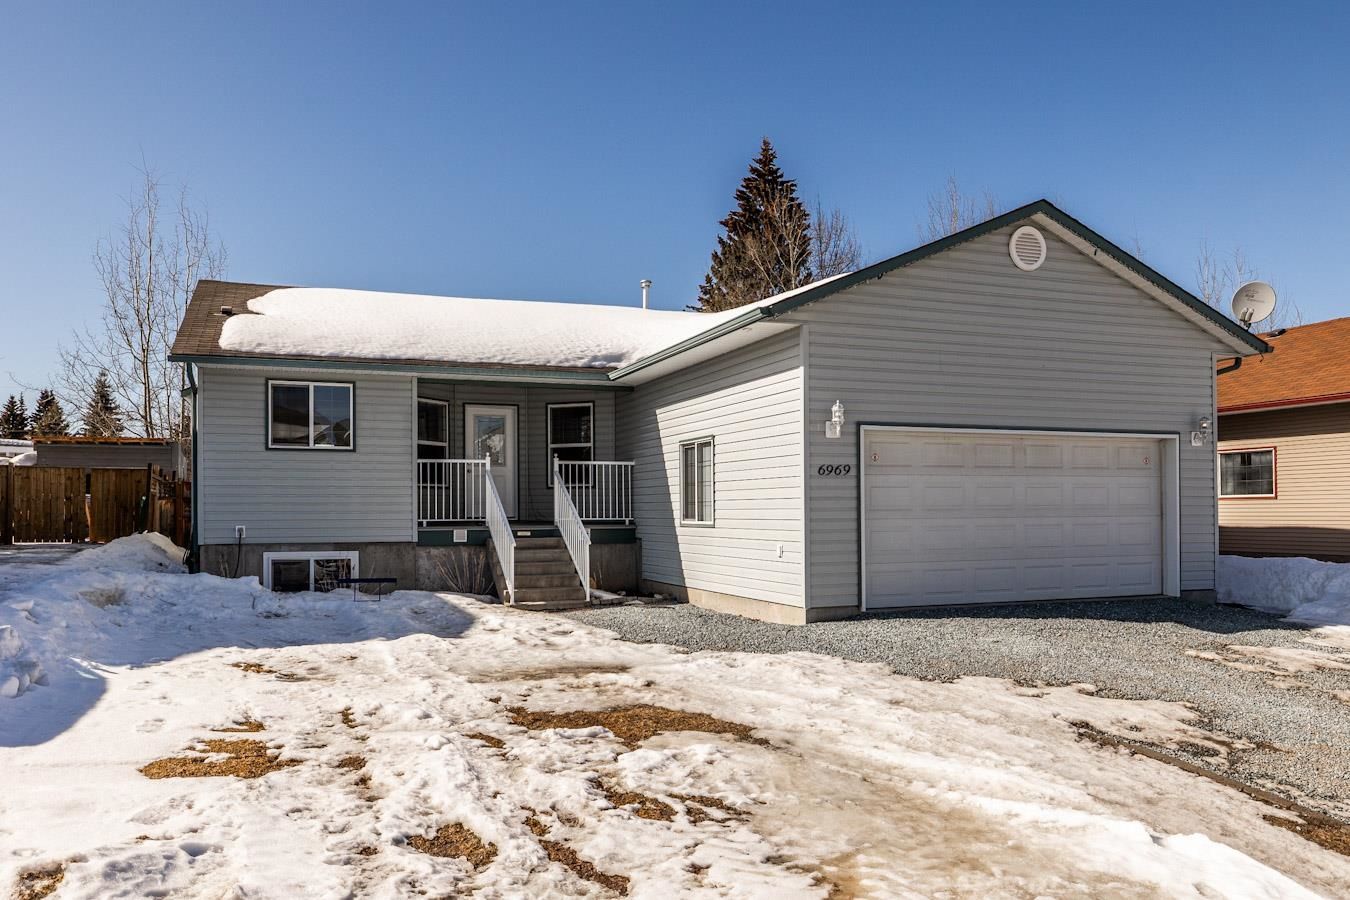 I have sold a property at 6969 EUGENE RD in Prince George
